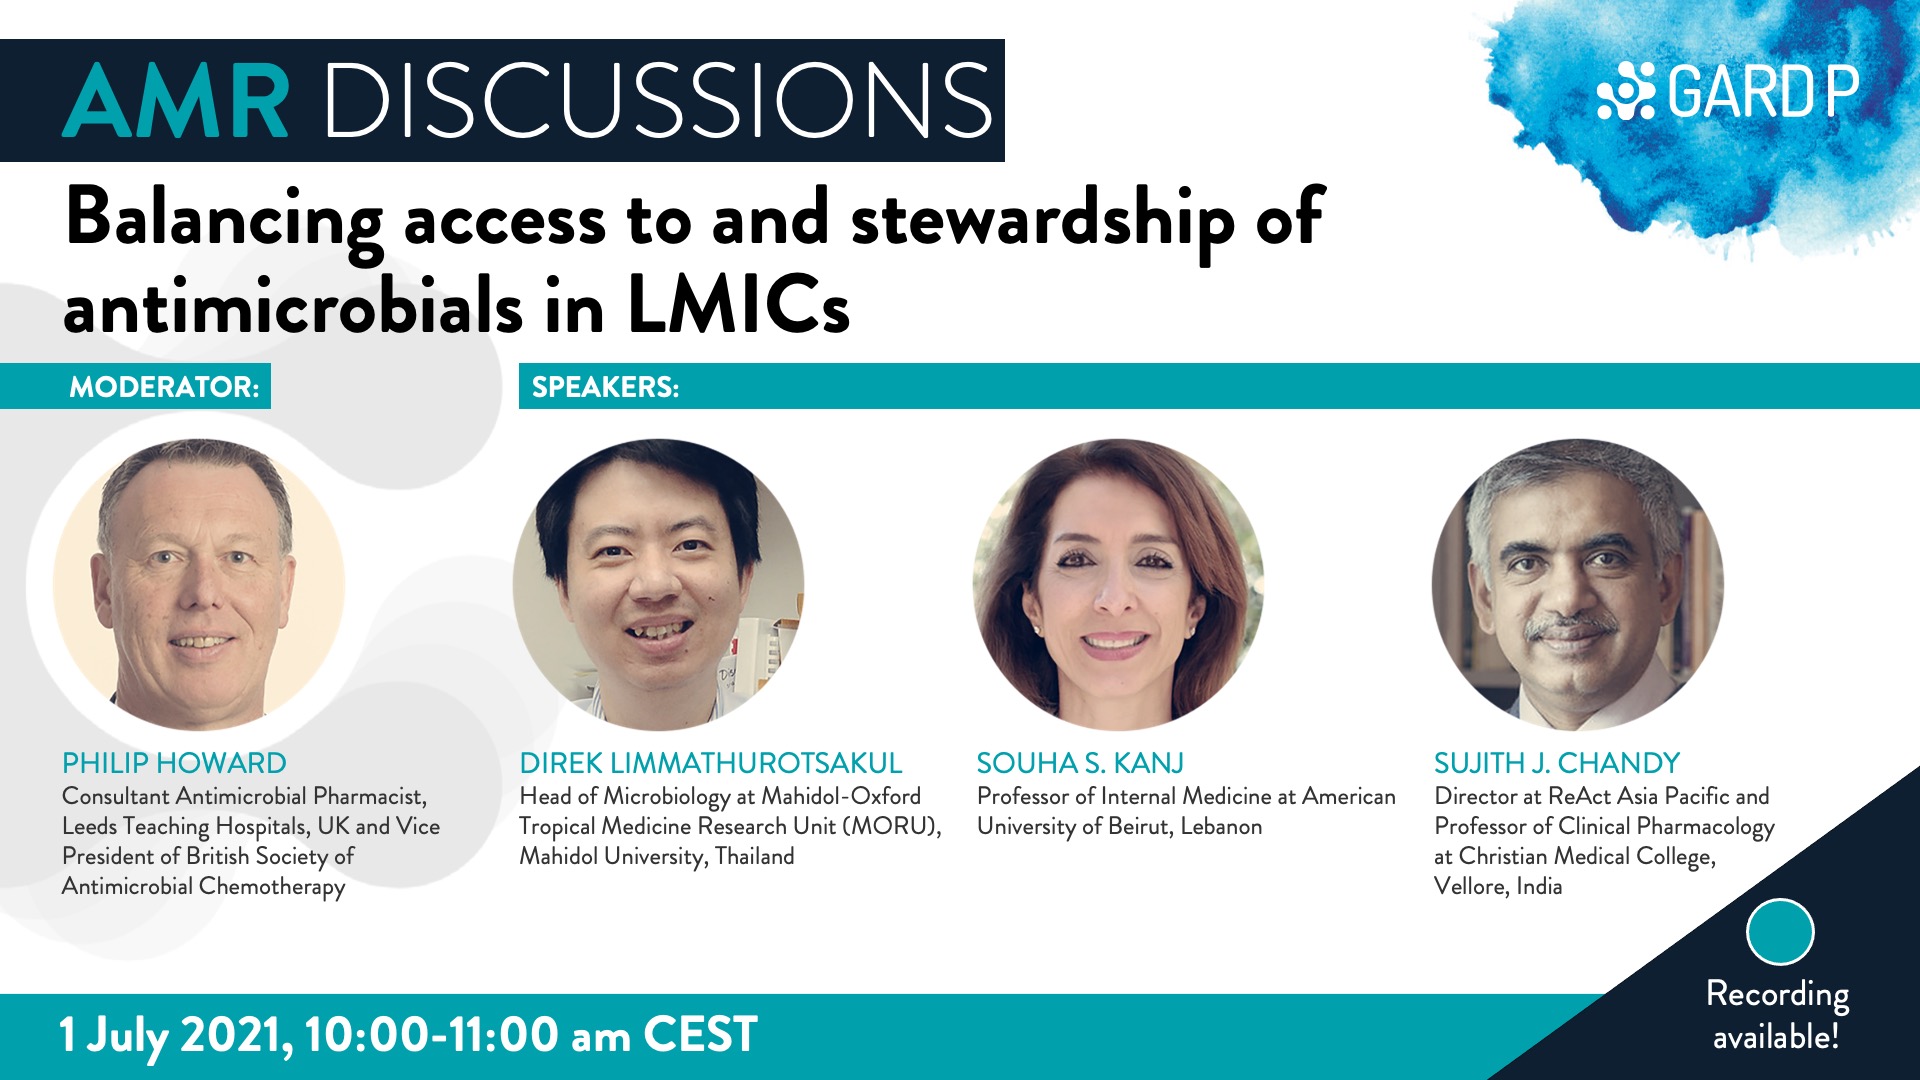 Balancing access to and stewardship of antimicrobials in LMICs